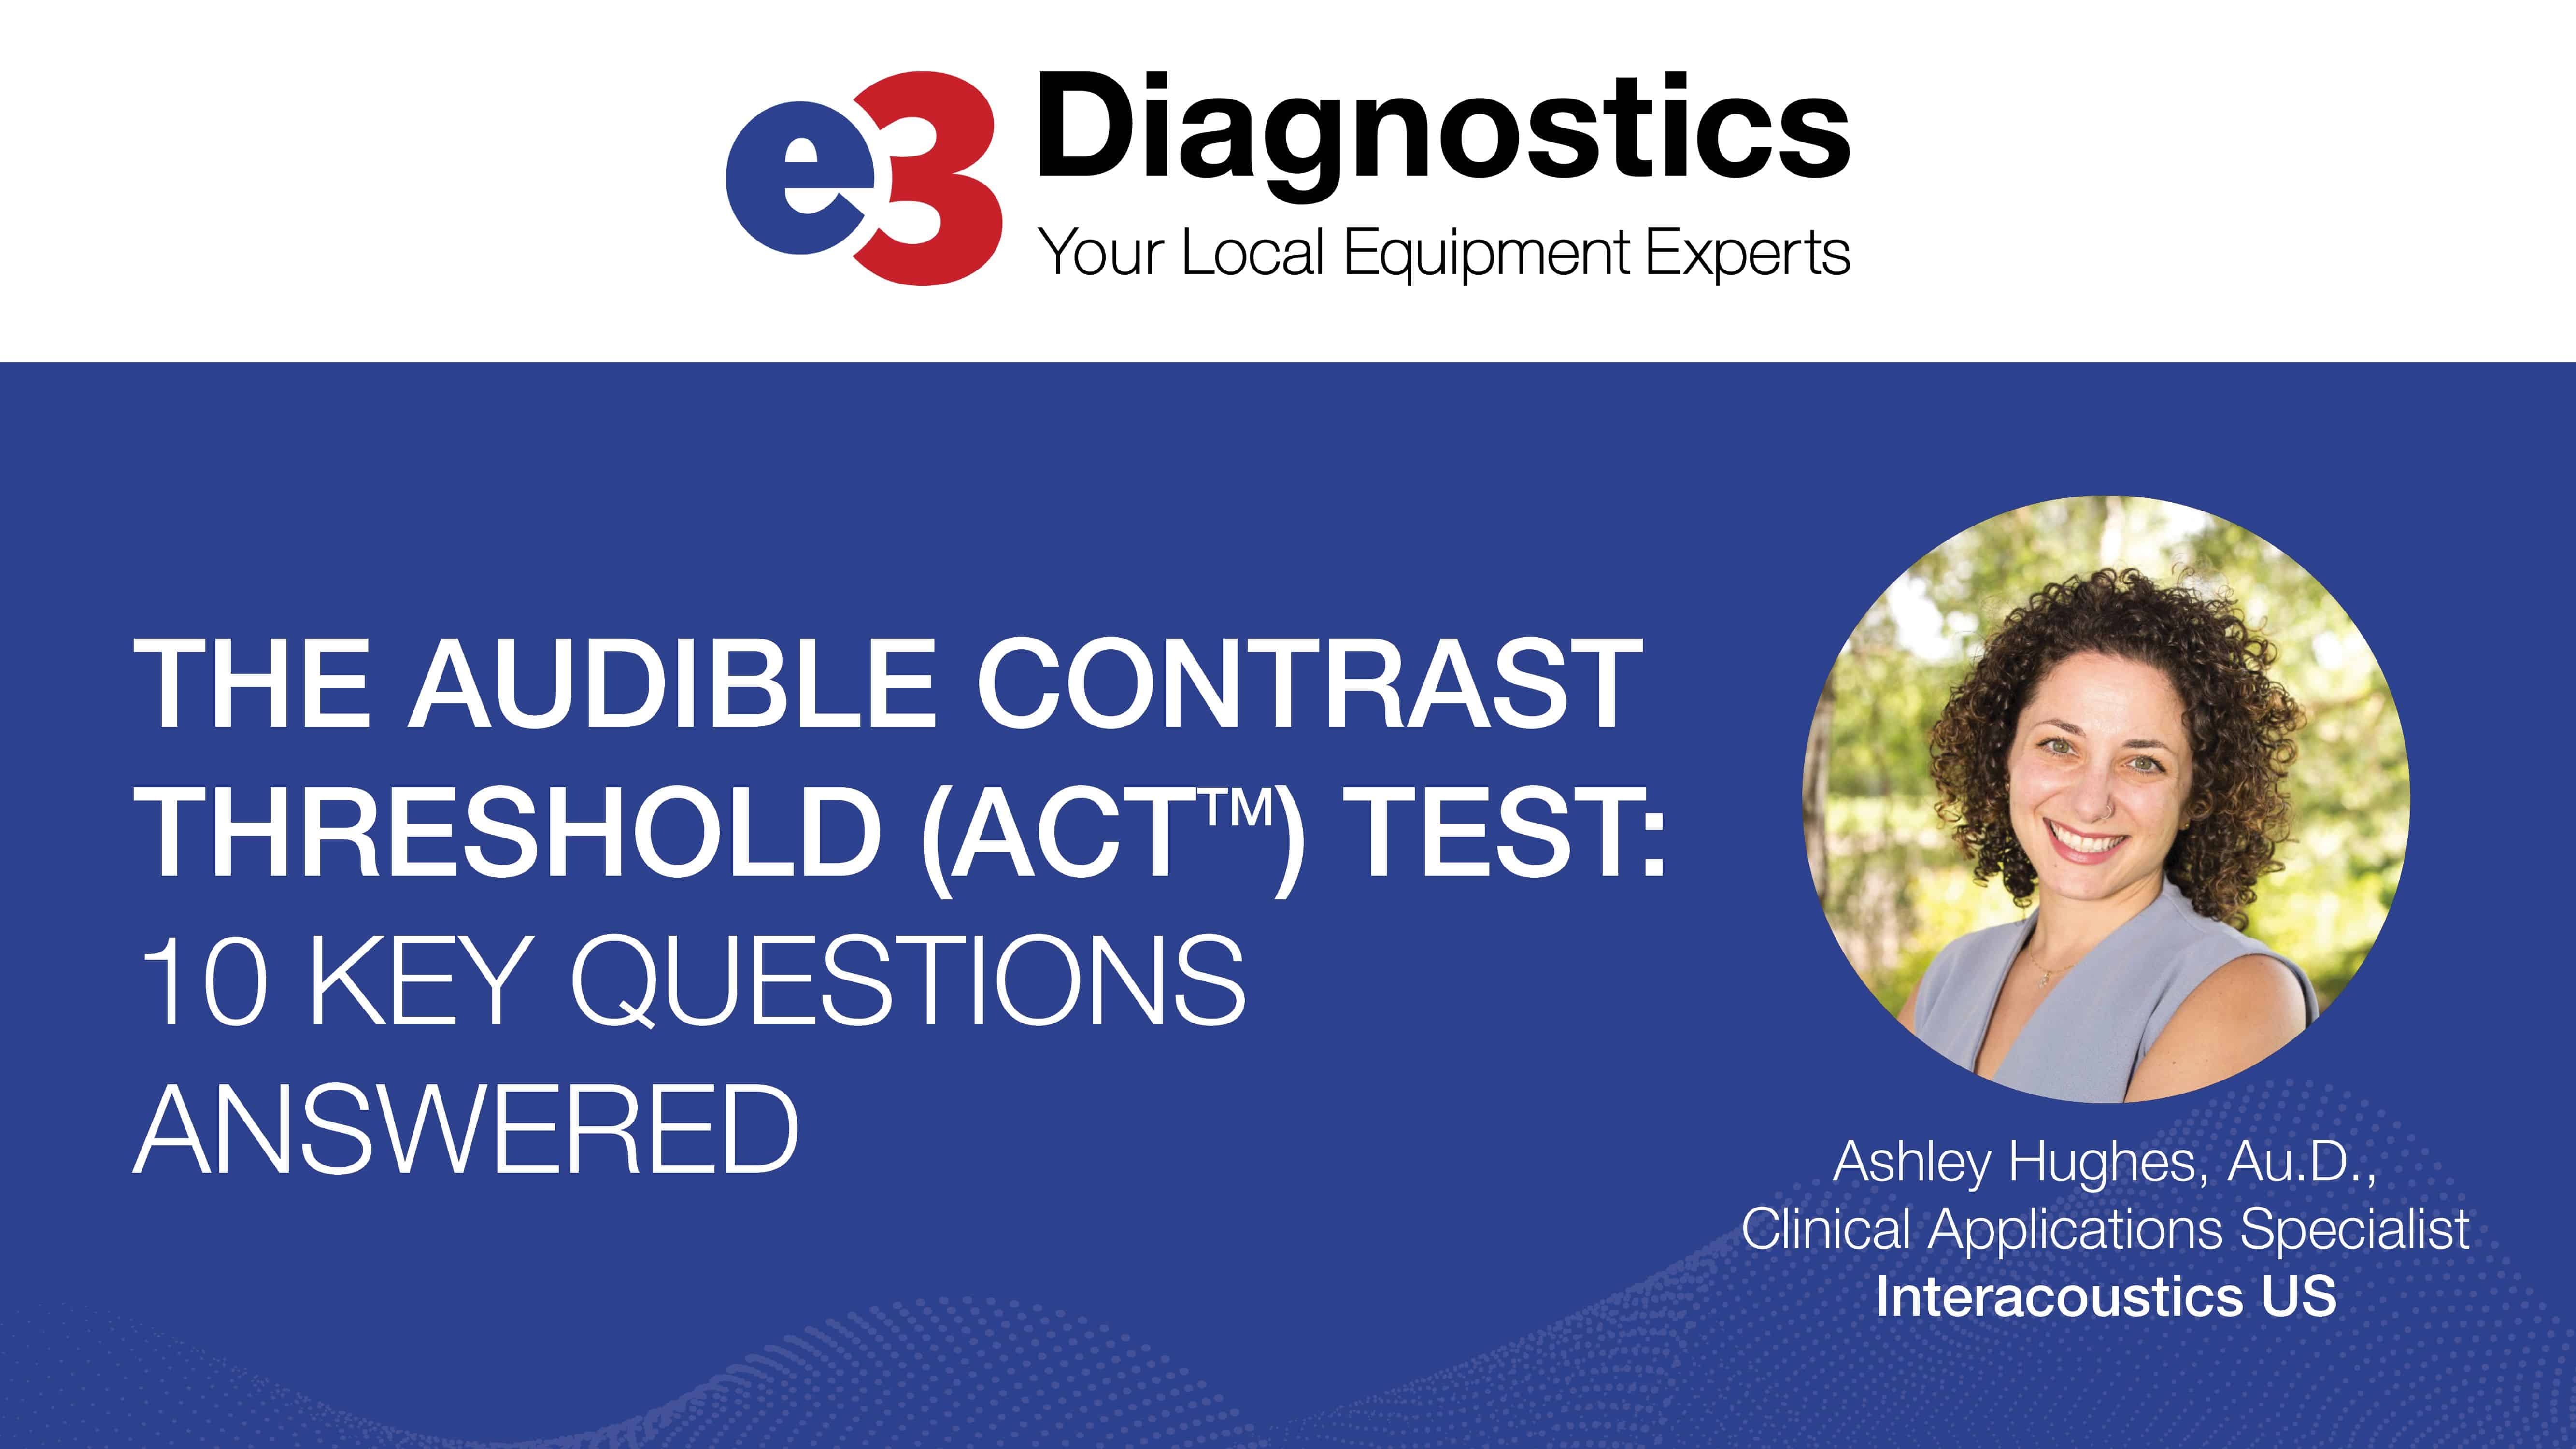 Featured image for “The Audible Contrast Threshold Test: 10 Key Questions Answered”